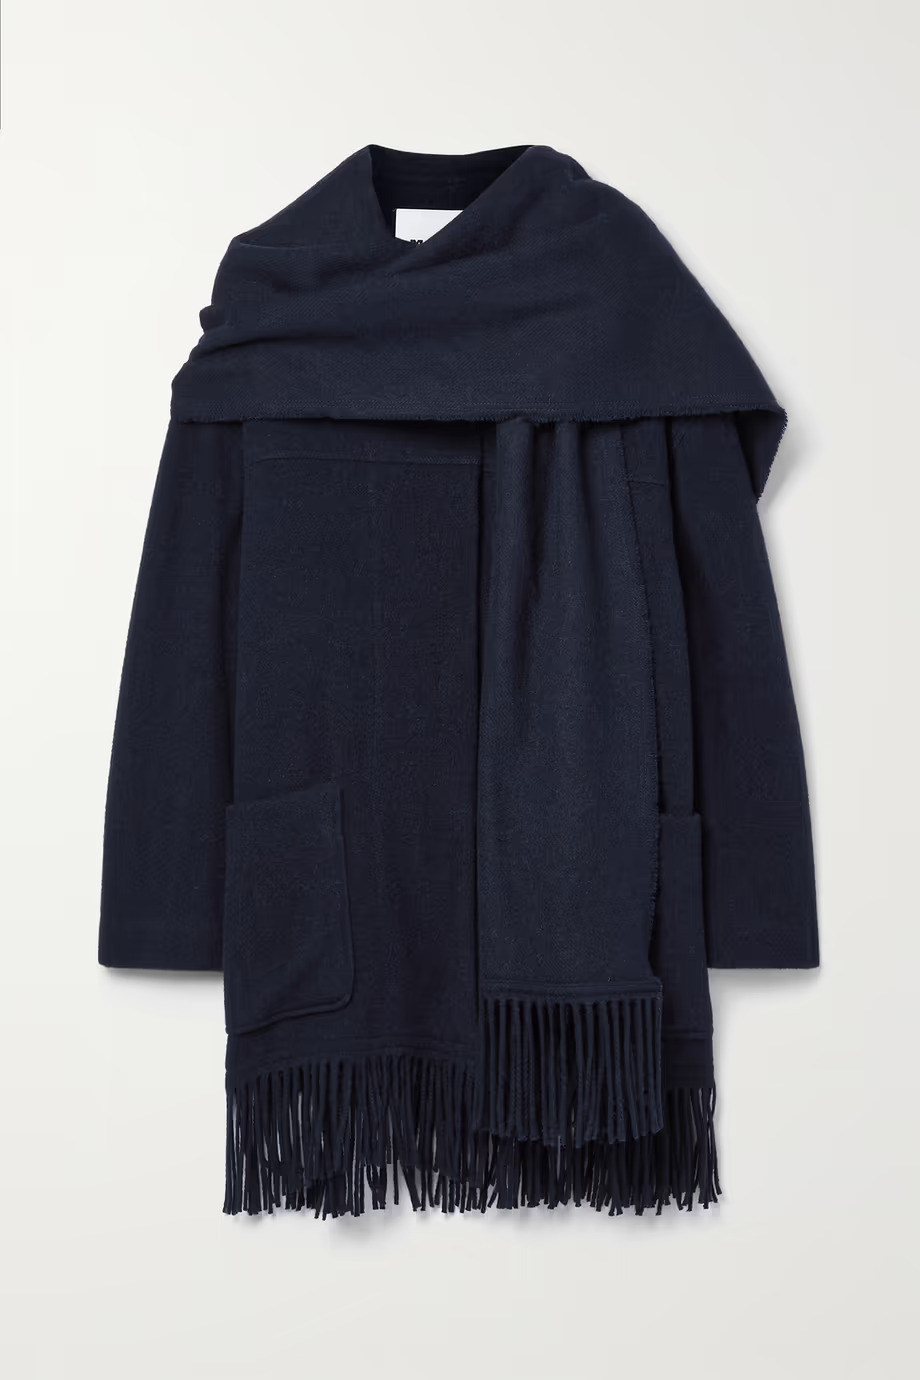 Trust Me, & Other Stories's New Scarf Coat Is Destined to Sell Out Very Soon